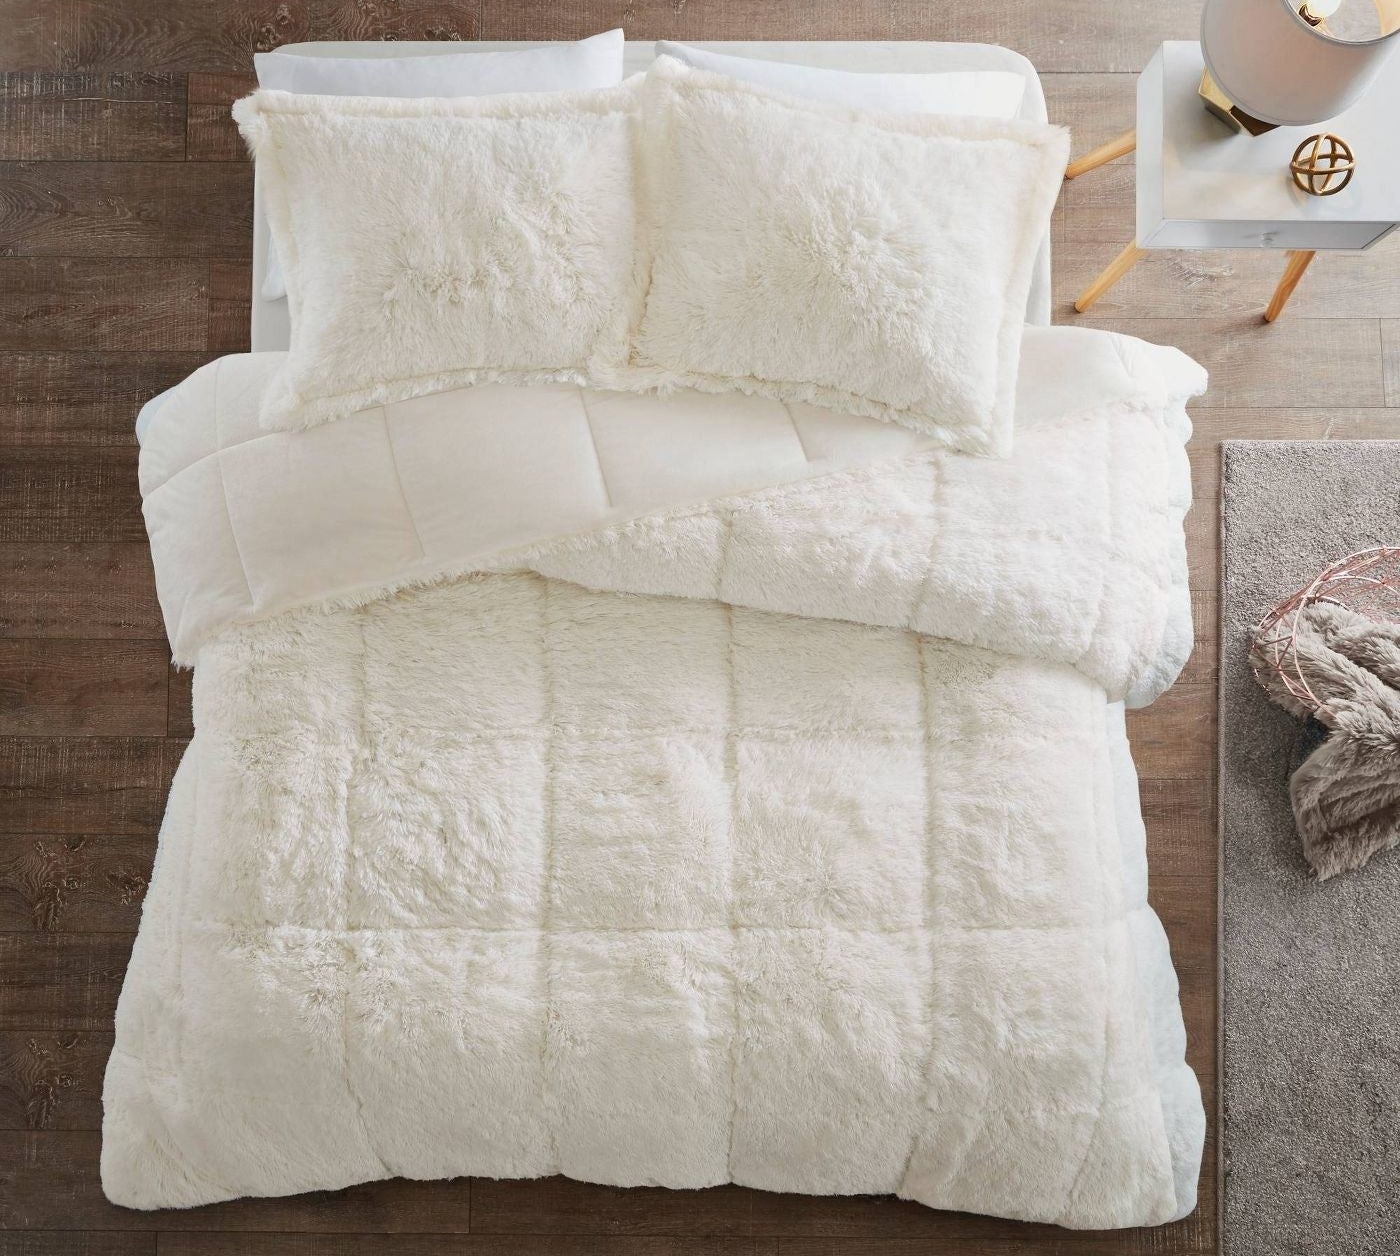 Faux fur white comforter with matching shams